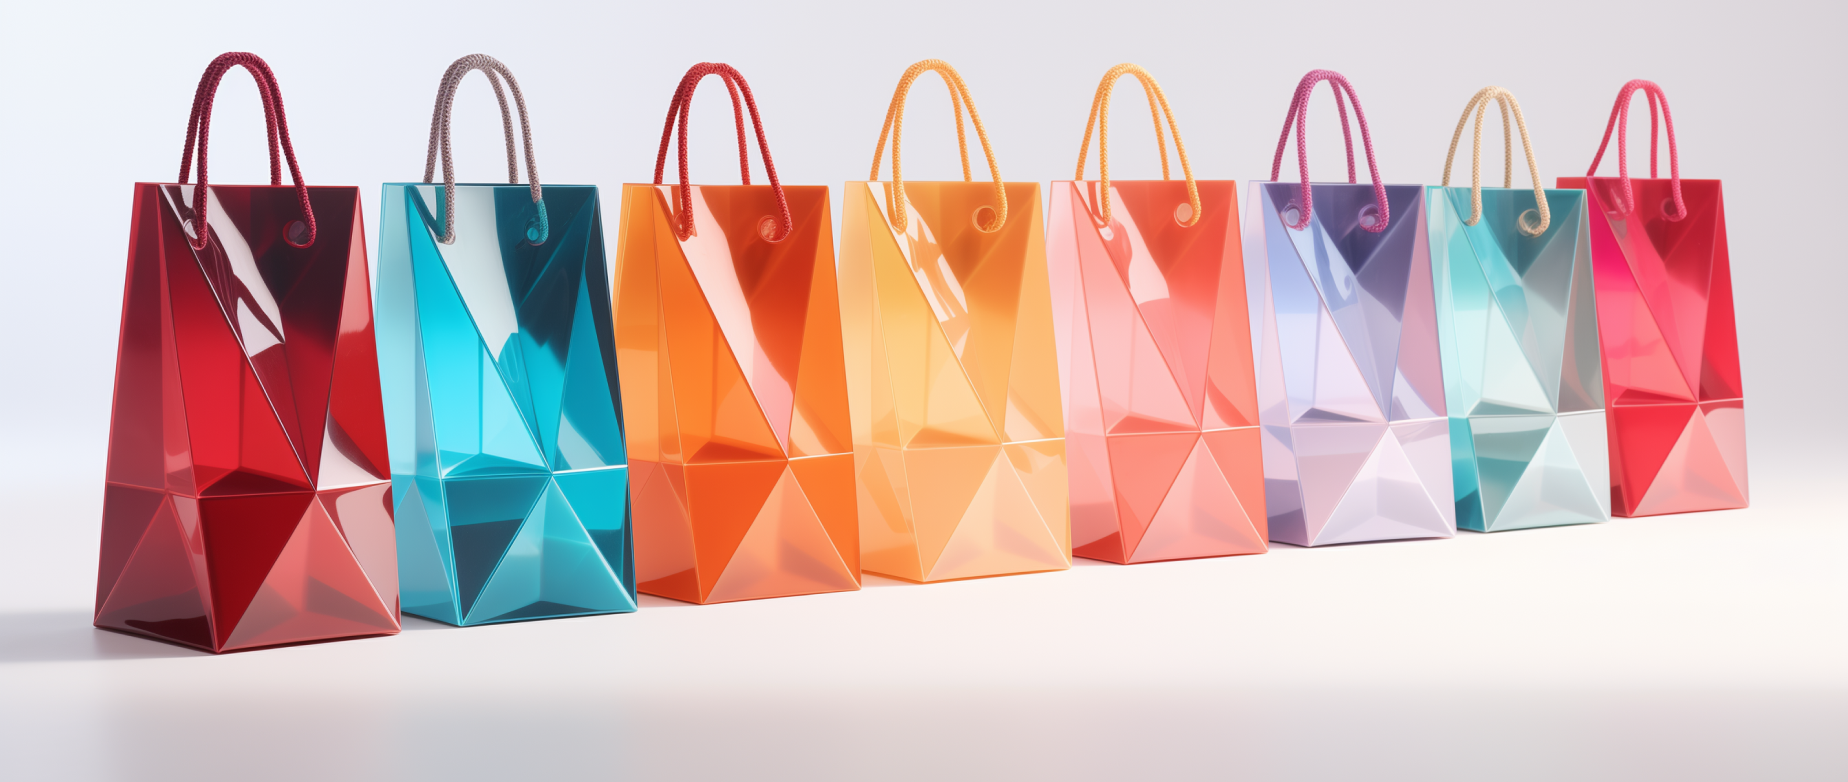 Eight shiny multicolored shopping bags next to each other in a line on a white background.